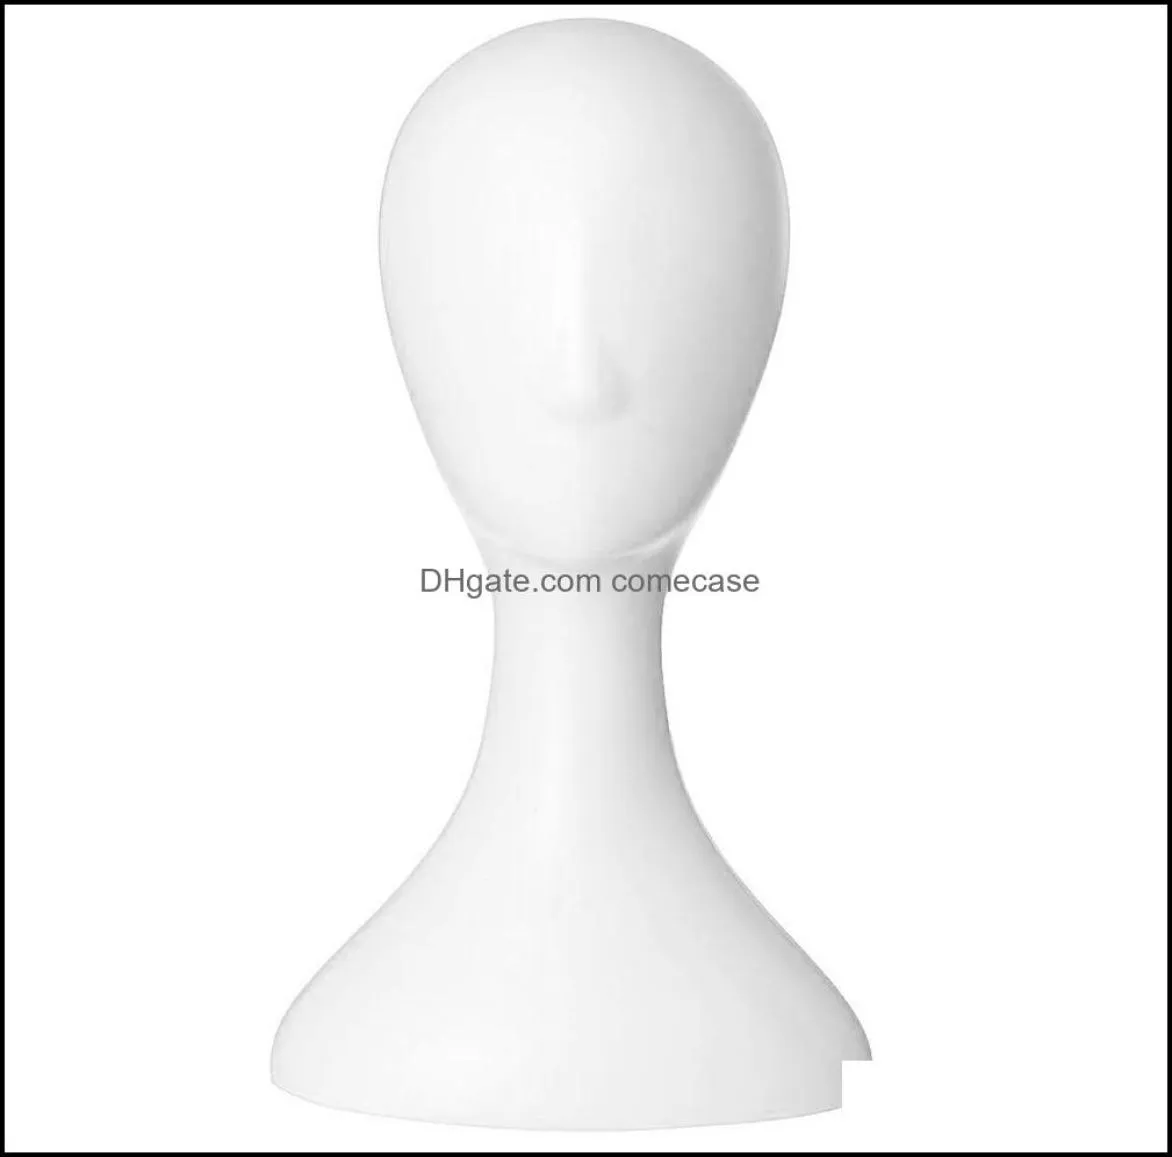 Mannequin Heads Hair Care Styling Tools Products Pro Female Plastic Abstract Manikin Head Model Display Display Delivery Delivery 7792560